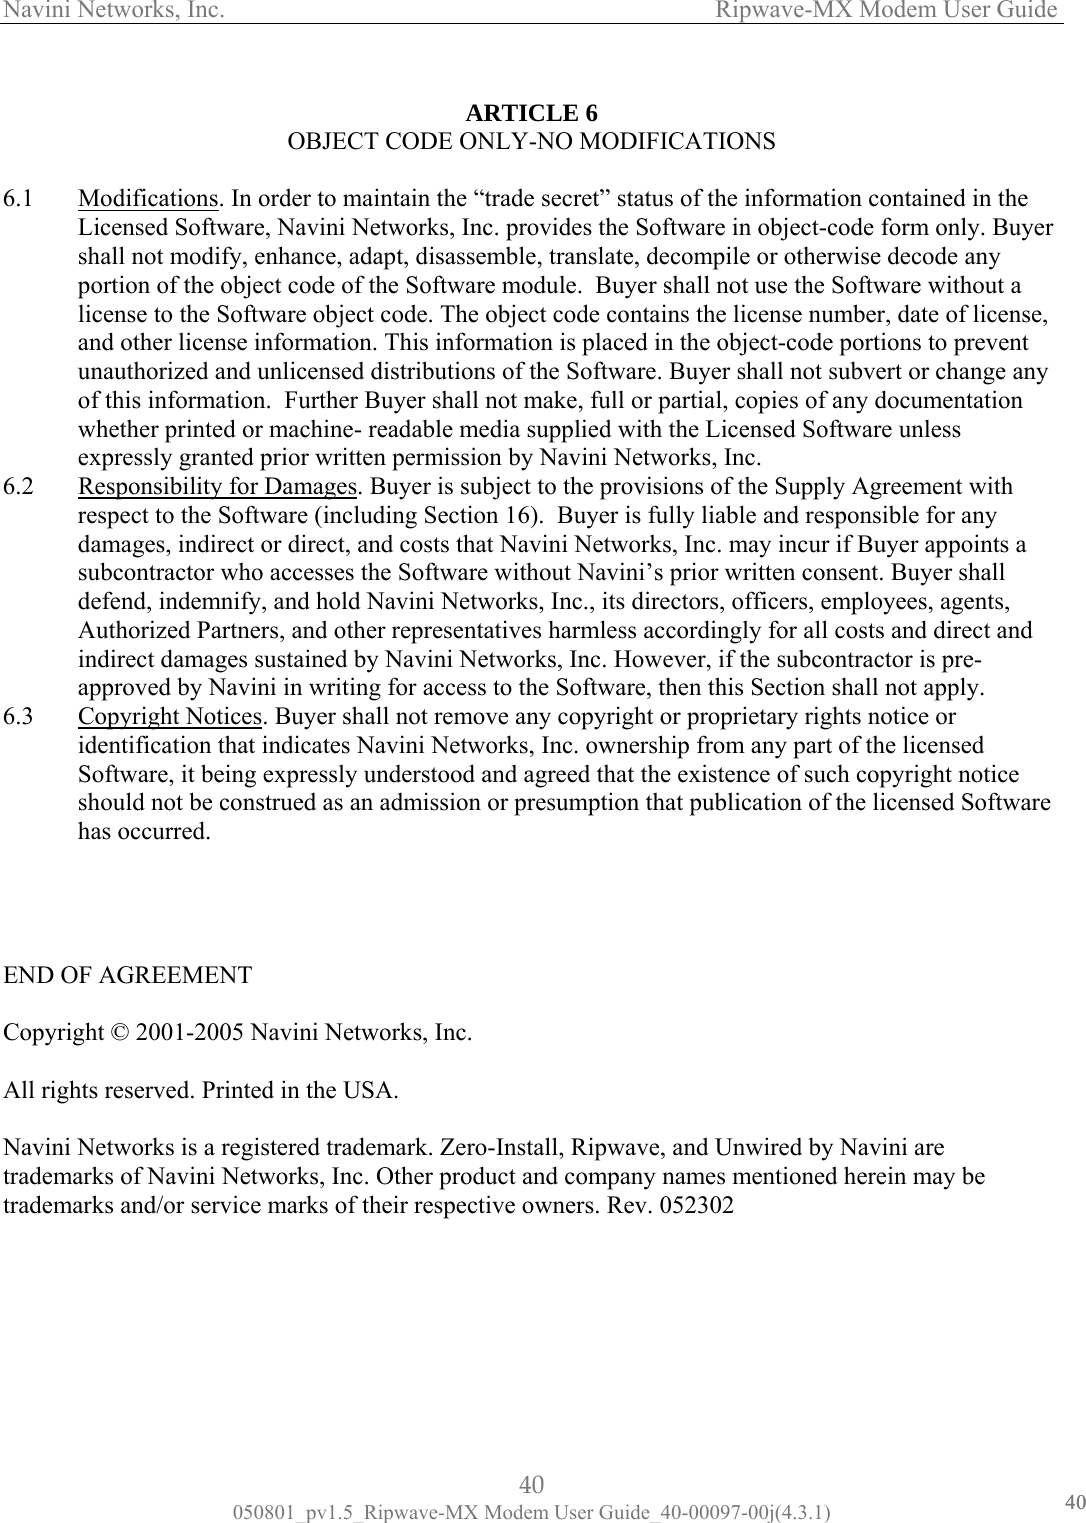 Navini Networks, Inc.                   Ripwave-MX Modem User Guide  ARTICLE 6 OBJECT CODE ONLY-NO MODIFICATIONS   cations6.1  Modifi . In order to maintain the “trade secret” status of the information contained in the  shall noportionand other license information. This information is placed in the object-code portions to prevent unauthorized and unlicensed distributions of the Software. Buyer shall not subvert or change any unless 6.2 Licensed Software, Navini Networks, Inc. provides the Software in object-code form only. Buyert modify, enhance, adapt, disassemble, translate, decompile or otherwise decode any  of the object code of the Software module.  Buyer shall not use the Software without a license to the Software object code. The object code contains the license number, date of license, of this information.  Further Buyer shall not make, full or partial, copies of any documentation whether printed or machine- readable media supplied with the Licensed Software expressly granted prior written permission by Navini Networks, Inc. Responsibility for Damages. Buyer is subject to the provisions of the Supply Agreement with respect to the Software (including Section 16).  Buyer is fully liable and responsible for any damages, indirect or direct, and costs that Navini Networks, Inc. may incur if Buyer apposubcontractor who accesses the Software without Navini’s prior written consent. Buyer shall defend, indemnify, and hold Navini Netwints a orks, Inc., its directors, officers, employees, agents, Authorized Partners, and other representatives harmless accordingly for all costs and direct and indirect damages sustained by Navini Networks, Inc. However, if the subcontractor is pre-approved by Navini in writing for access to the Software, then this Section shall not apply. 6.3  Copyright Notices. Buyer shall not remove any copyright or proprietary rights notice or identification that indicates Navini Networks, Inc. ownership from any part of the licensed  ware     Copyri All righ Navinitrademtradem spective owners. Rev. 052302       Software, it being expressly understood and agreed that the existence of such copyright noticeshould not be construed as an admission or presumption that publication of the licensed Softhas occurred.   END OF AGREEMENT ght © 2001-2005 Navini Networks, Inc. ts reserved. Printed in the USA.  Networks is a registered trademark. Zero-Install, Ripwave, and Unwired by Navini are arks of Navini Networks, Inc. Other product and company names mentioned herein may be arks and/or service marks of their re40 050801_pv1.5_Ripwave-MX Modem User Guide_40-00097-00j(4.3.1) 4040